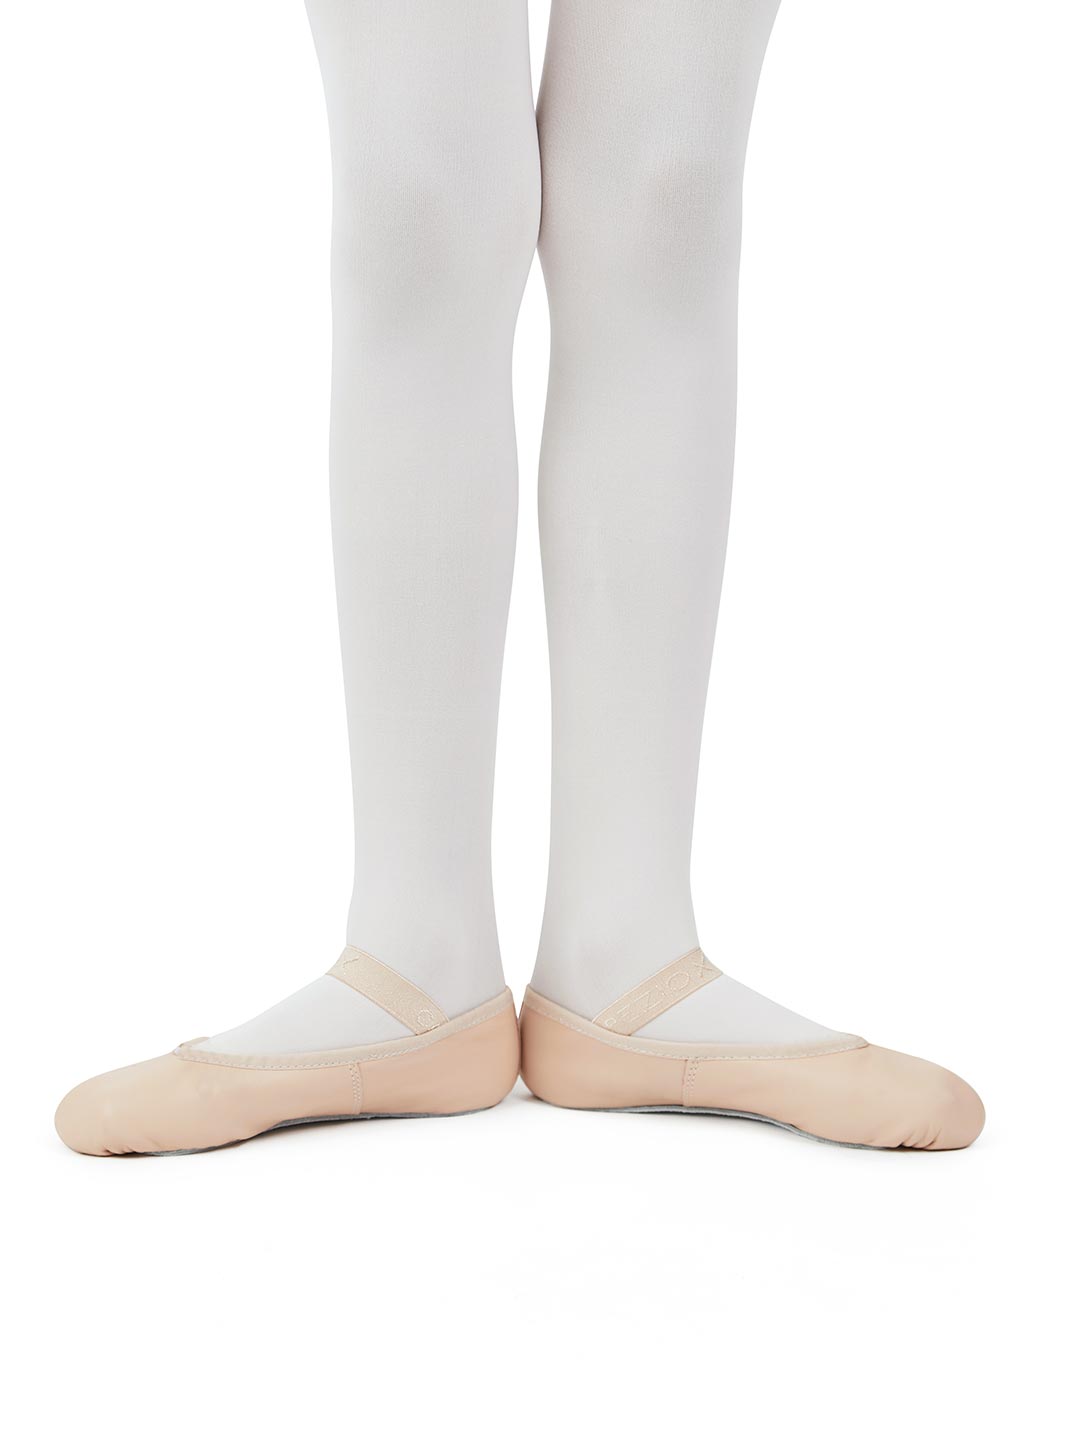 Ballet shoes: Top picks for dancers - Times of India